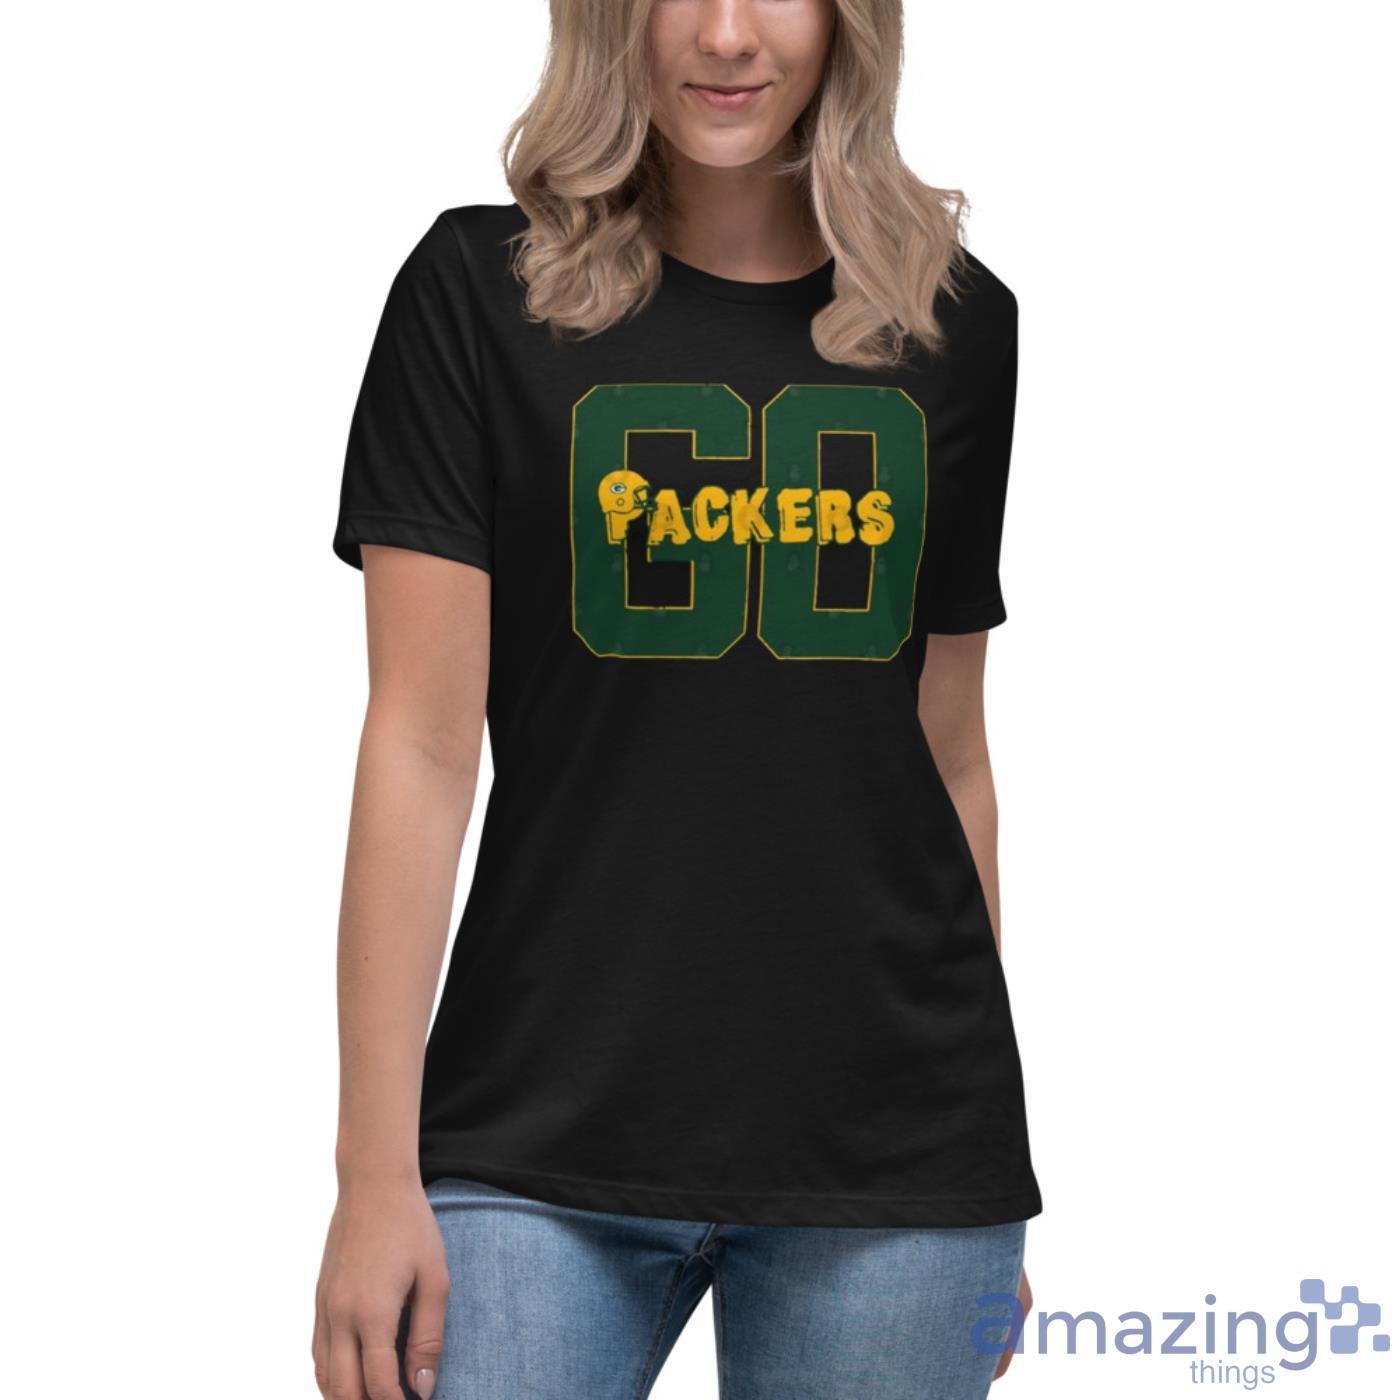 Go Packers Green Bay Packers Shirt